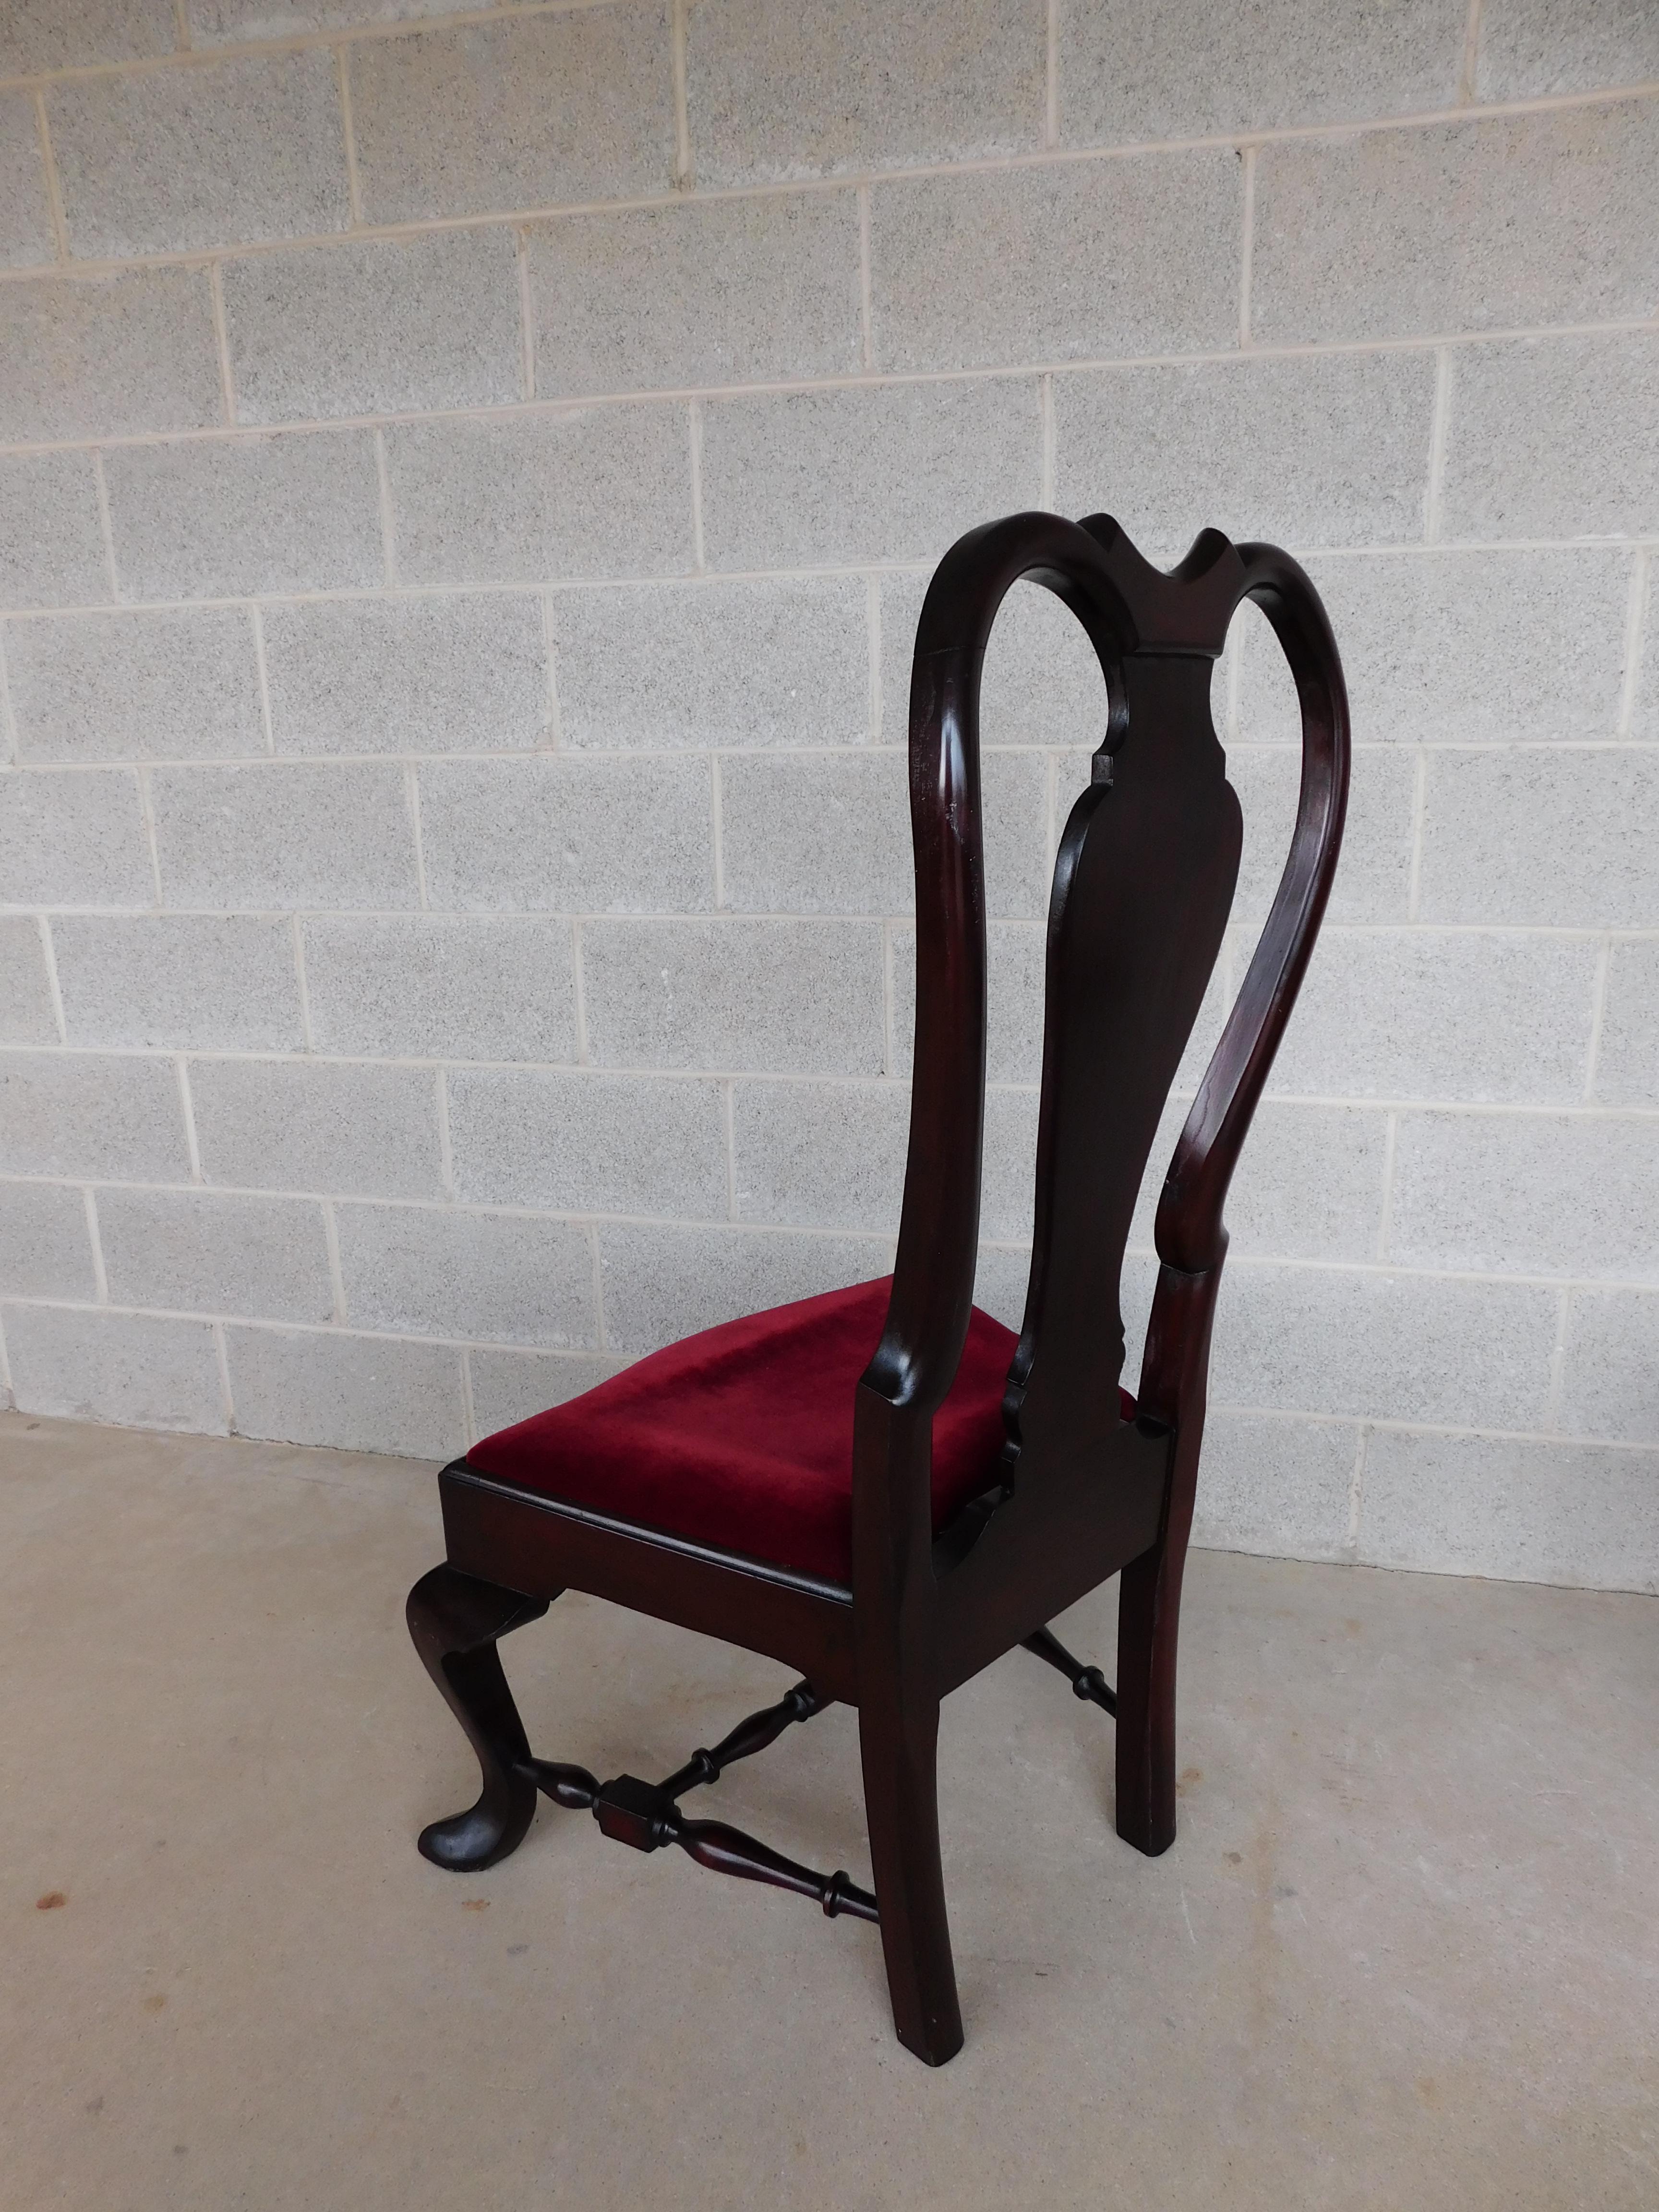 Feldenkreis Mahogany Queen Anne Style Oversize Accent Fireside Chairs - a Pair For Sale 7